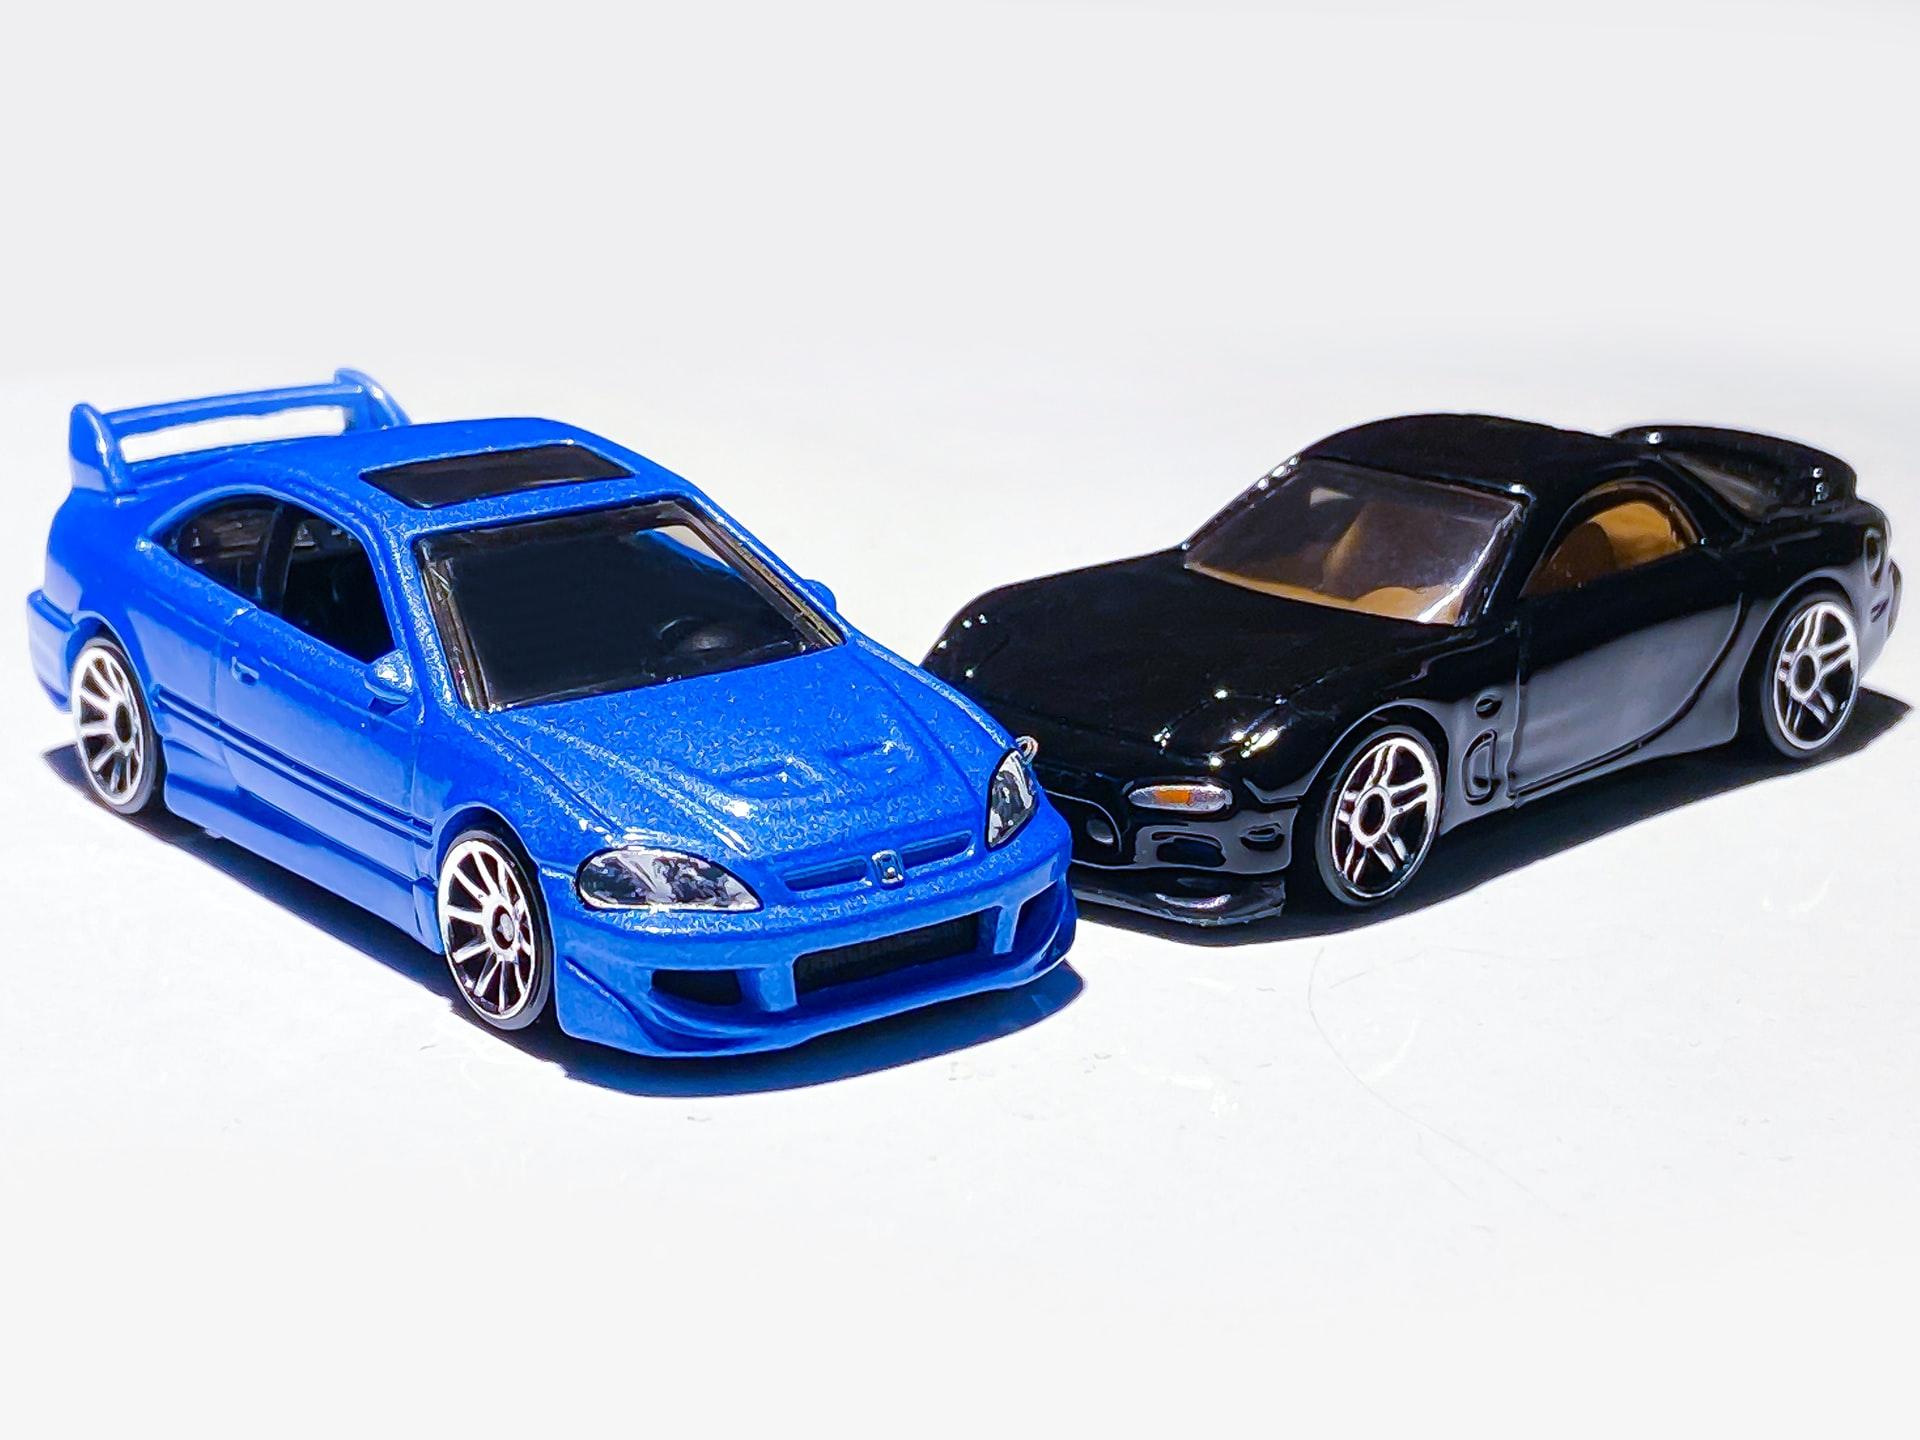 Have you ever wondered how expensive Hot Wheels cars can get? 